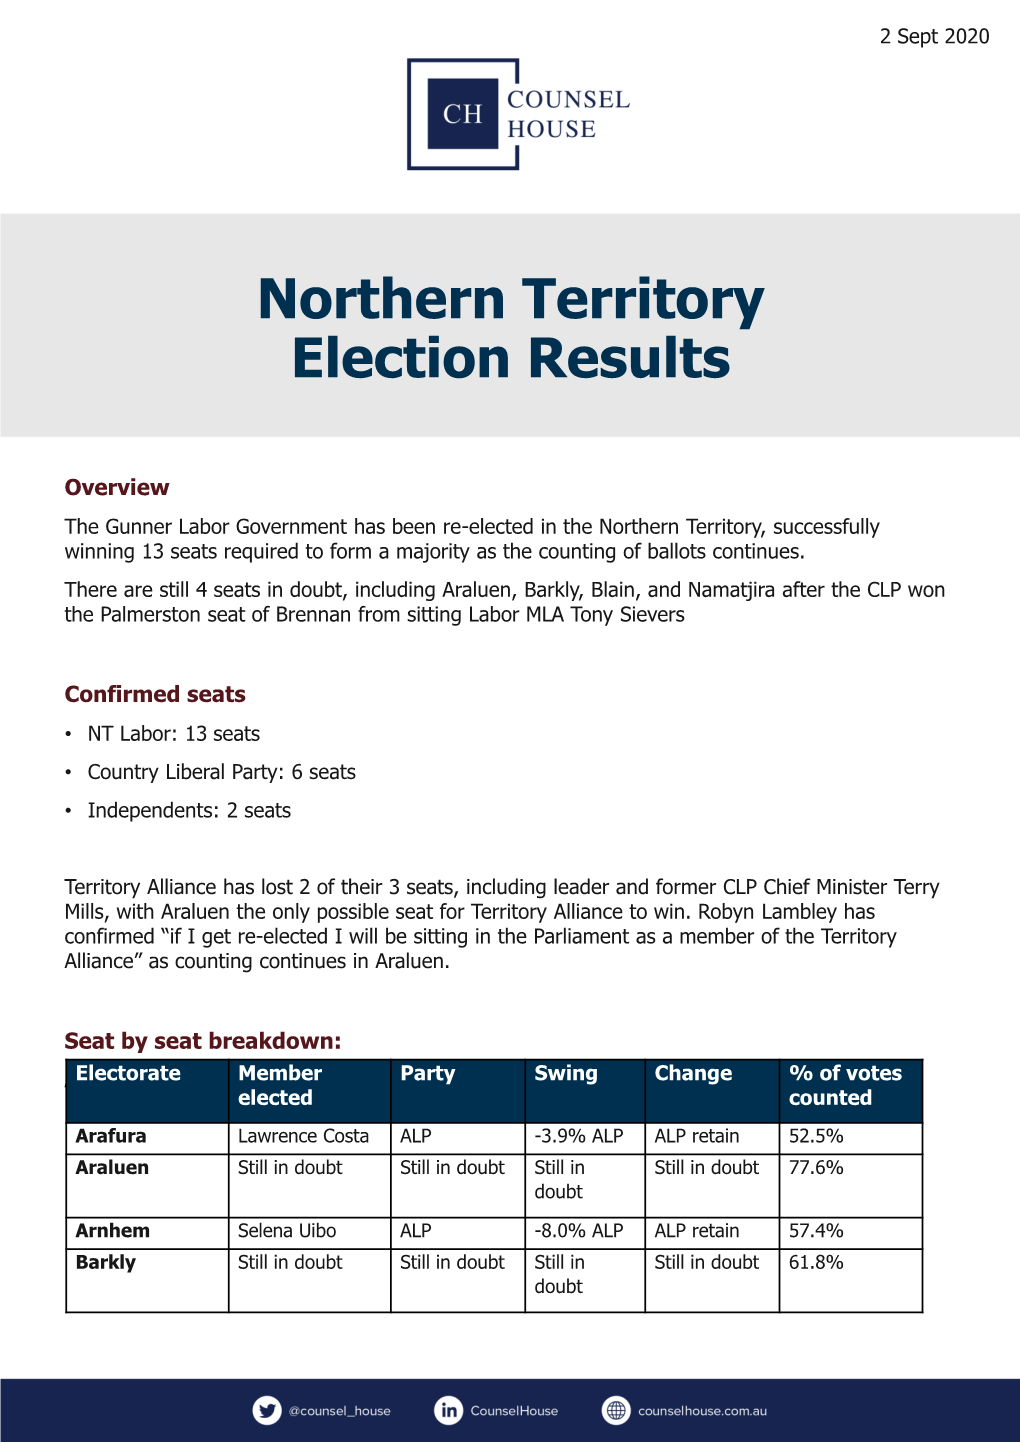 Northern Territory Election Results